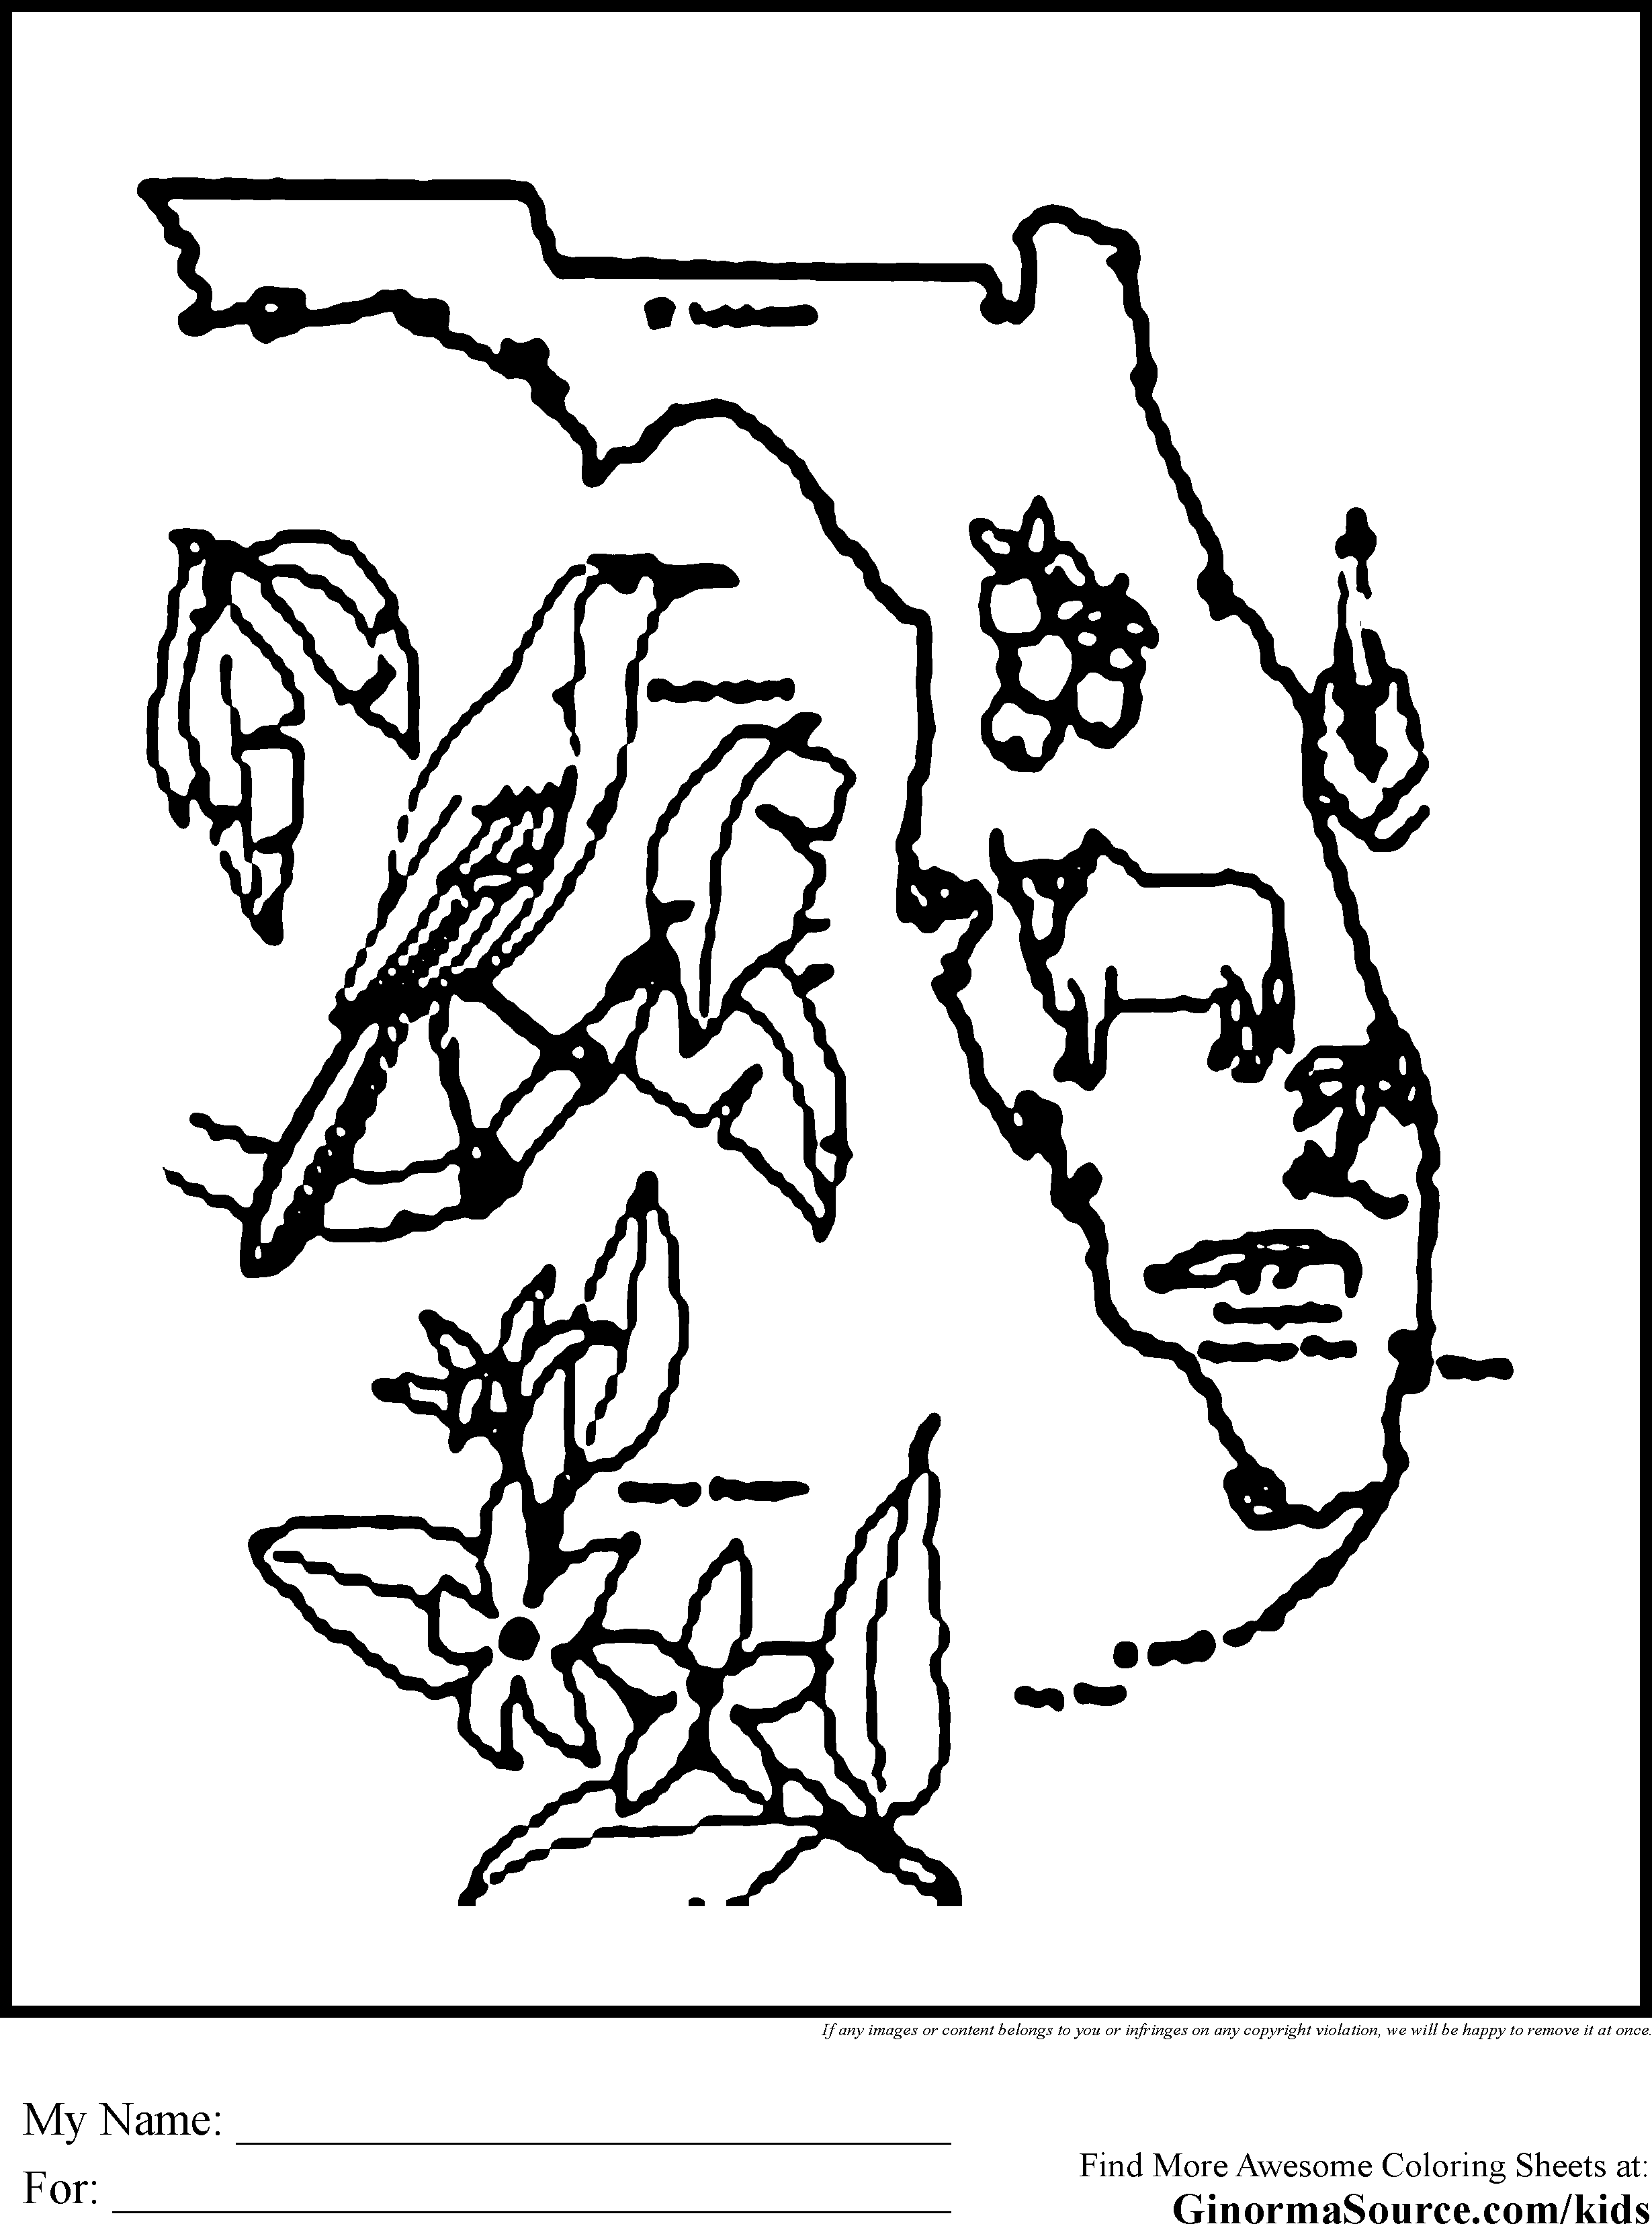 florida coloring page florida coloring page by doodle art alley teaching florida page coloring 